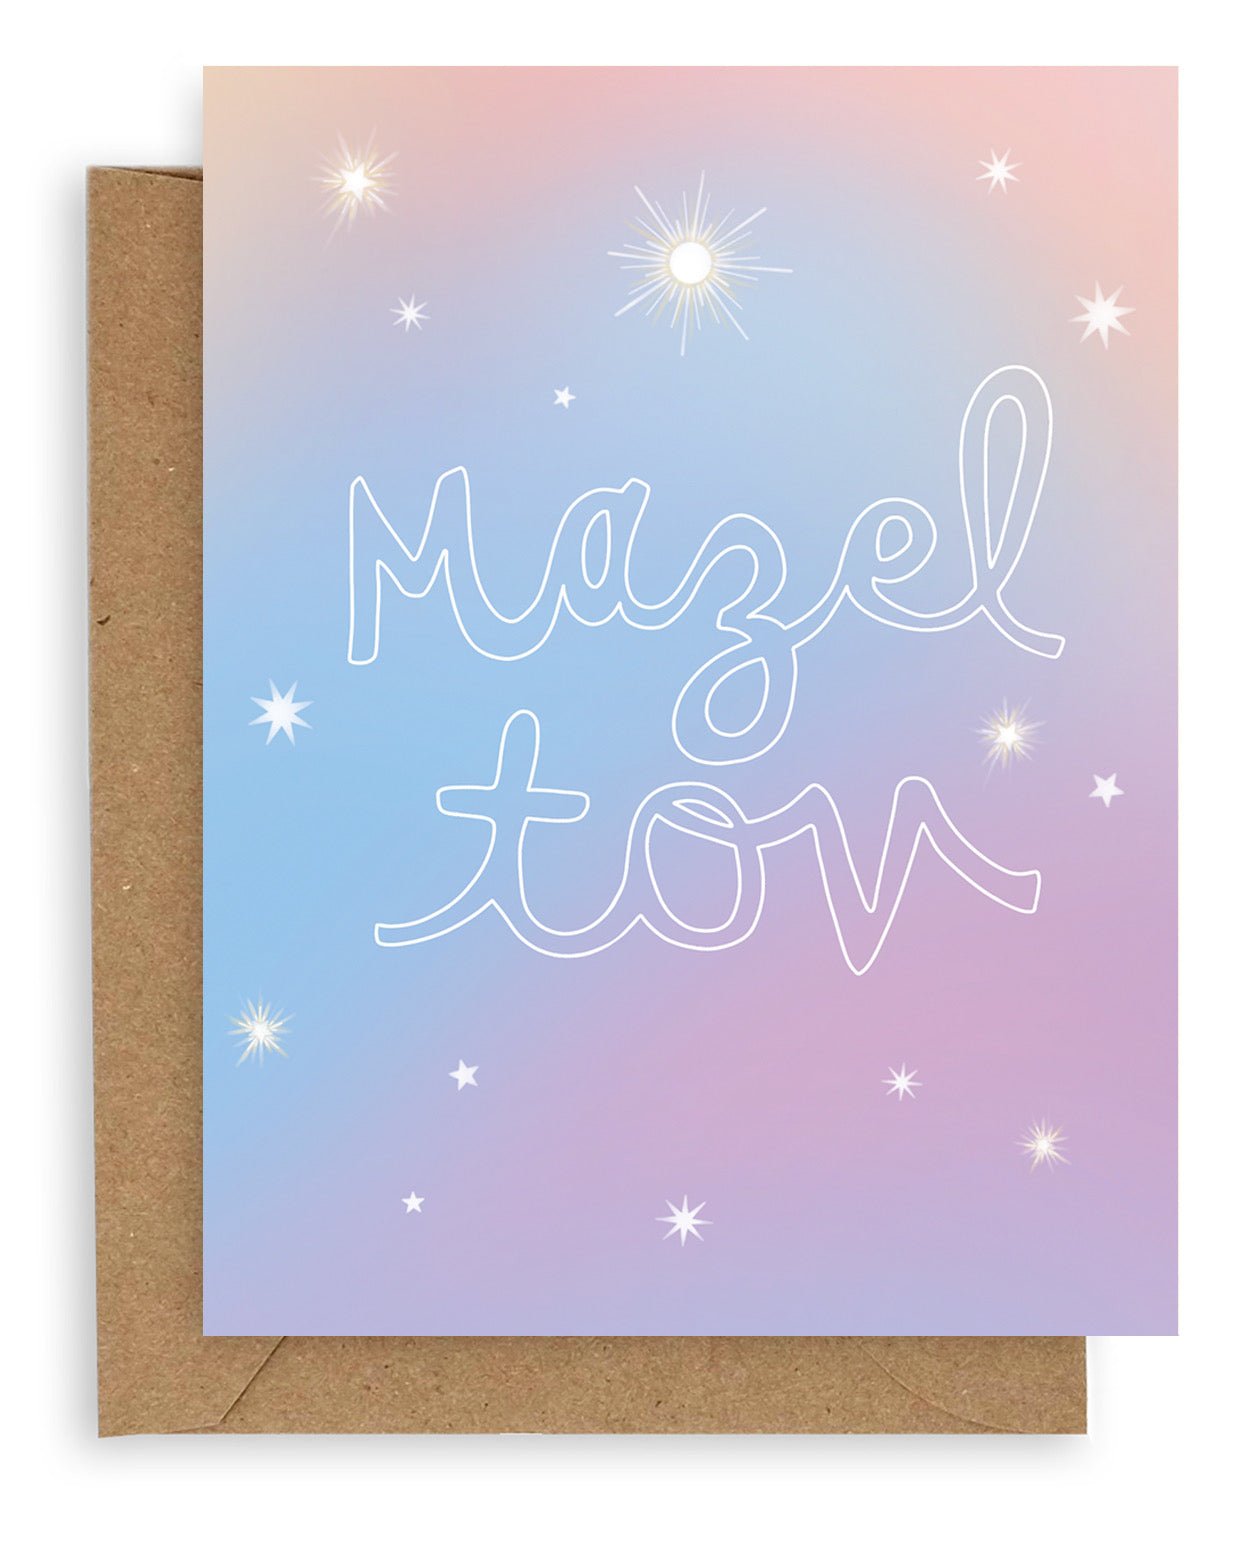 &quot;Mazel Tov&quot; in large, hollow cursive on a gradient blue-lavender background with various kinds of stars printed on cardstock with a kraft envelope.